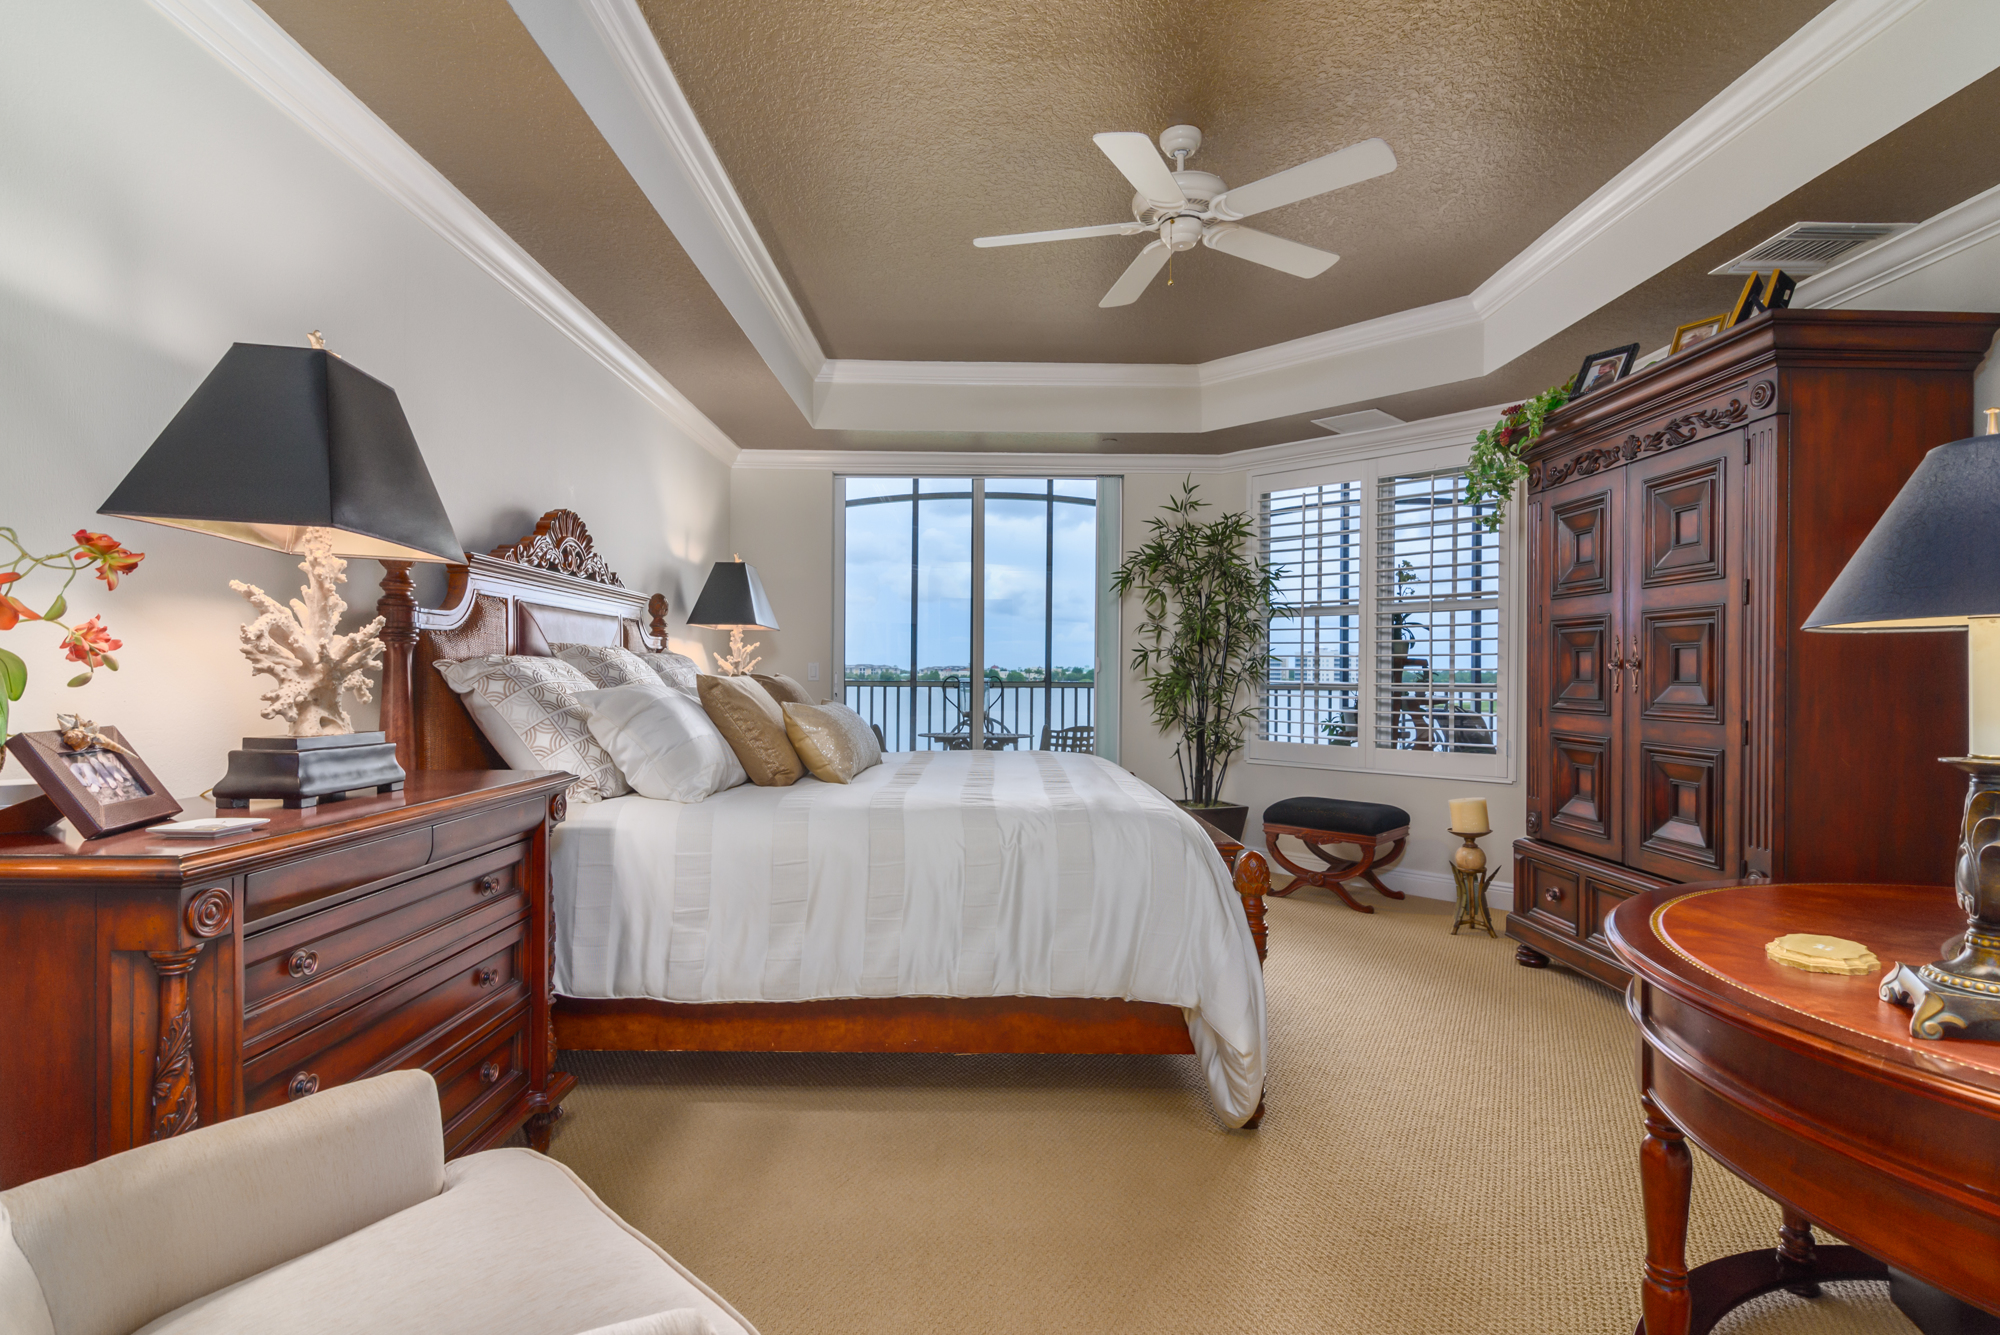 An elegant trayed ceiling adds drama to the master bedroom. Sliders open to the screened balcony overlooking the water view. A master bath with a soaking tub and separate walk-in shower top off the master suite.